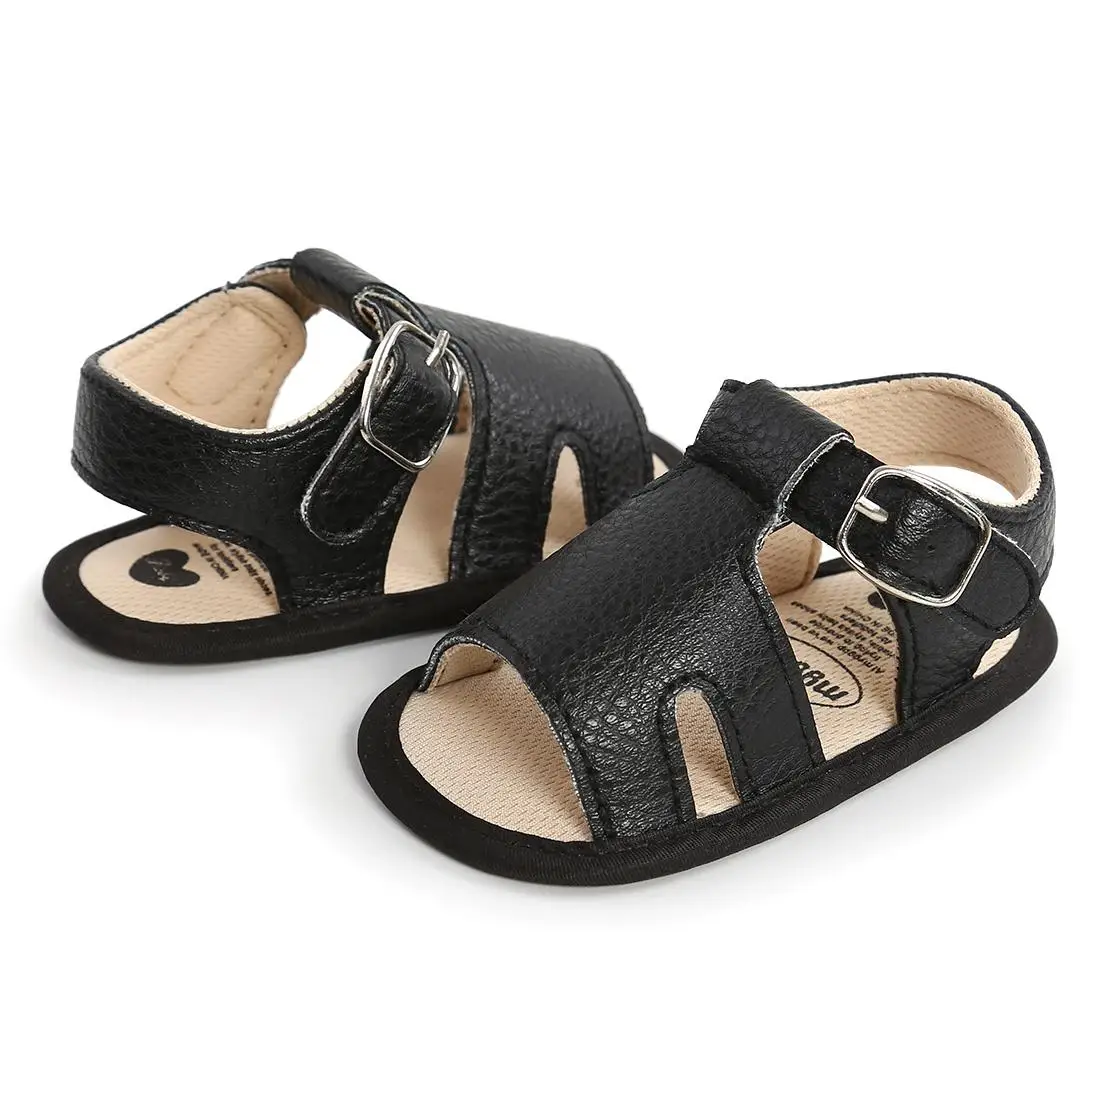 High Quality Summer Babies Leather Shoes Soft Rubber Sole Anti-slip 0-1 years Baby Sandal Shoes for Boys Girls